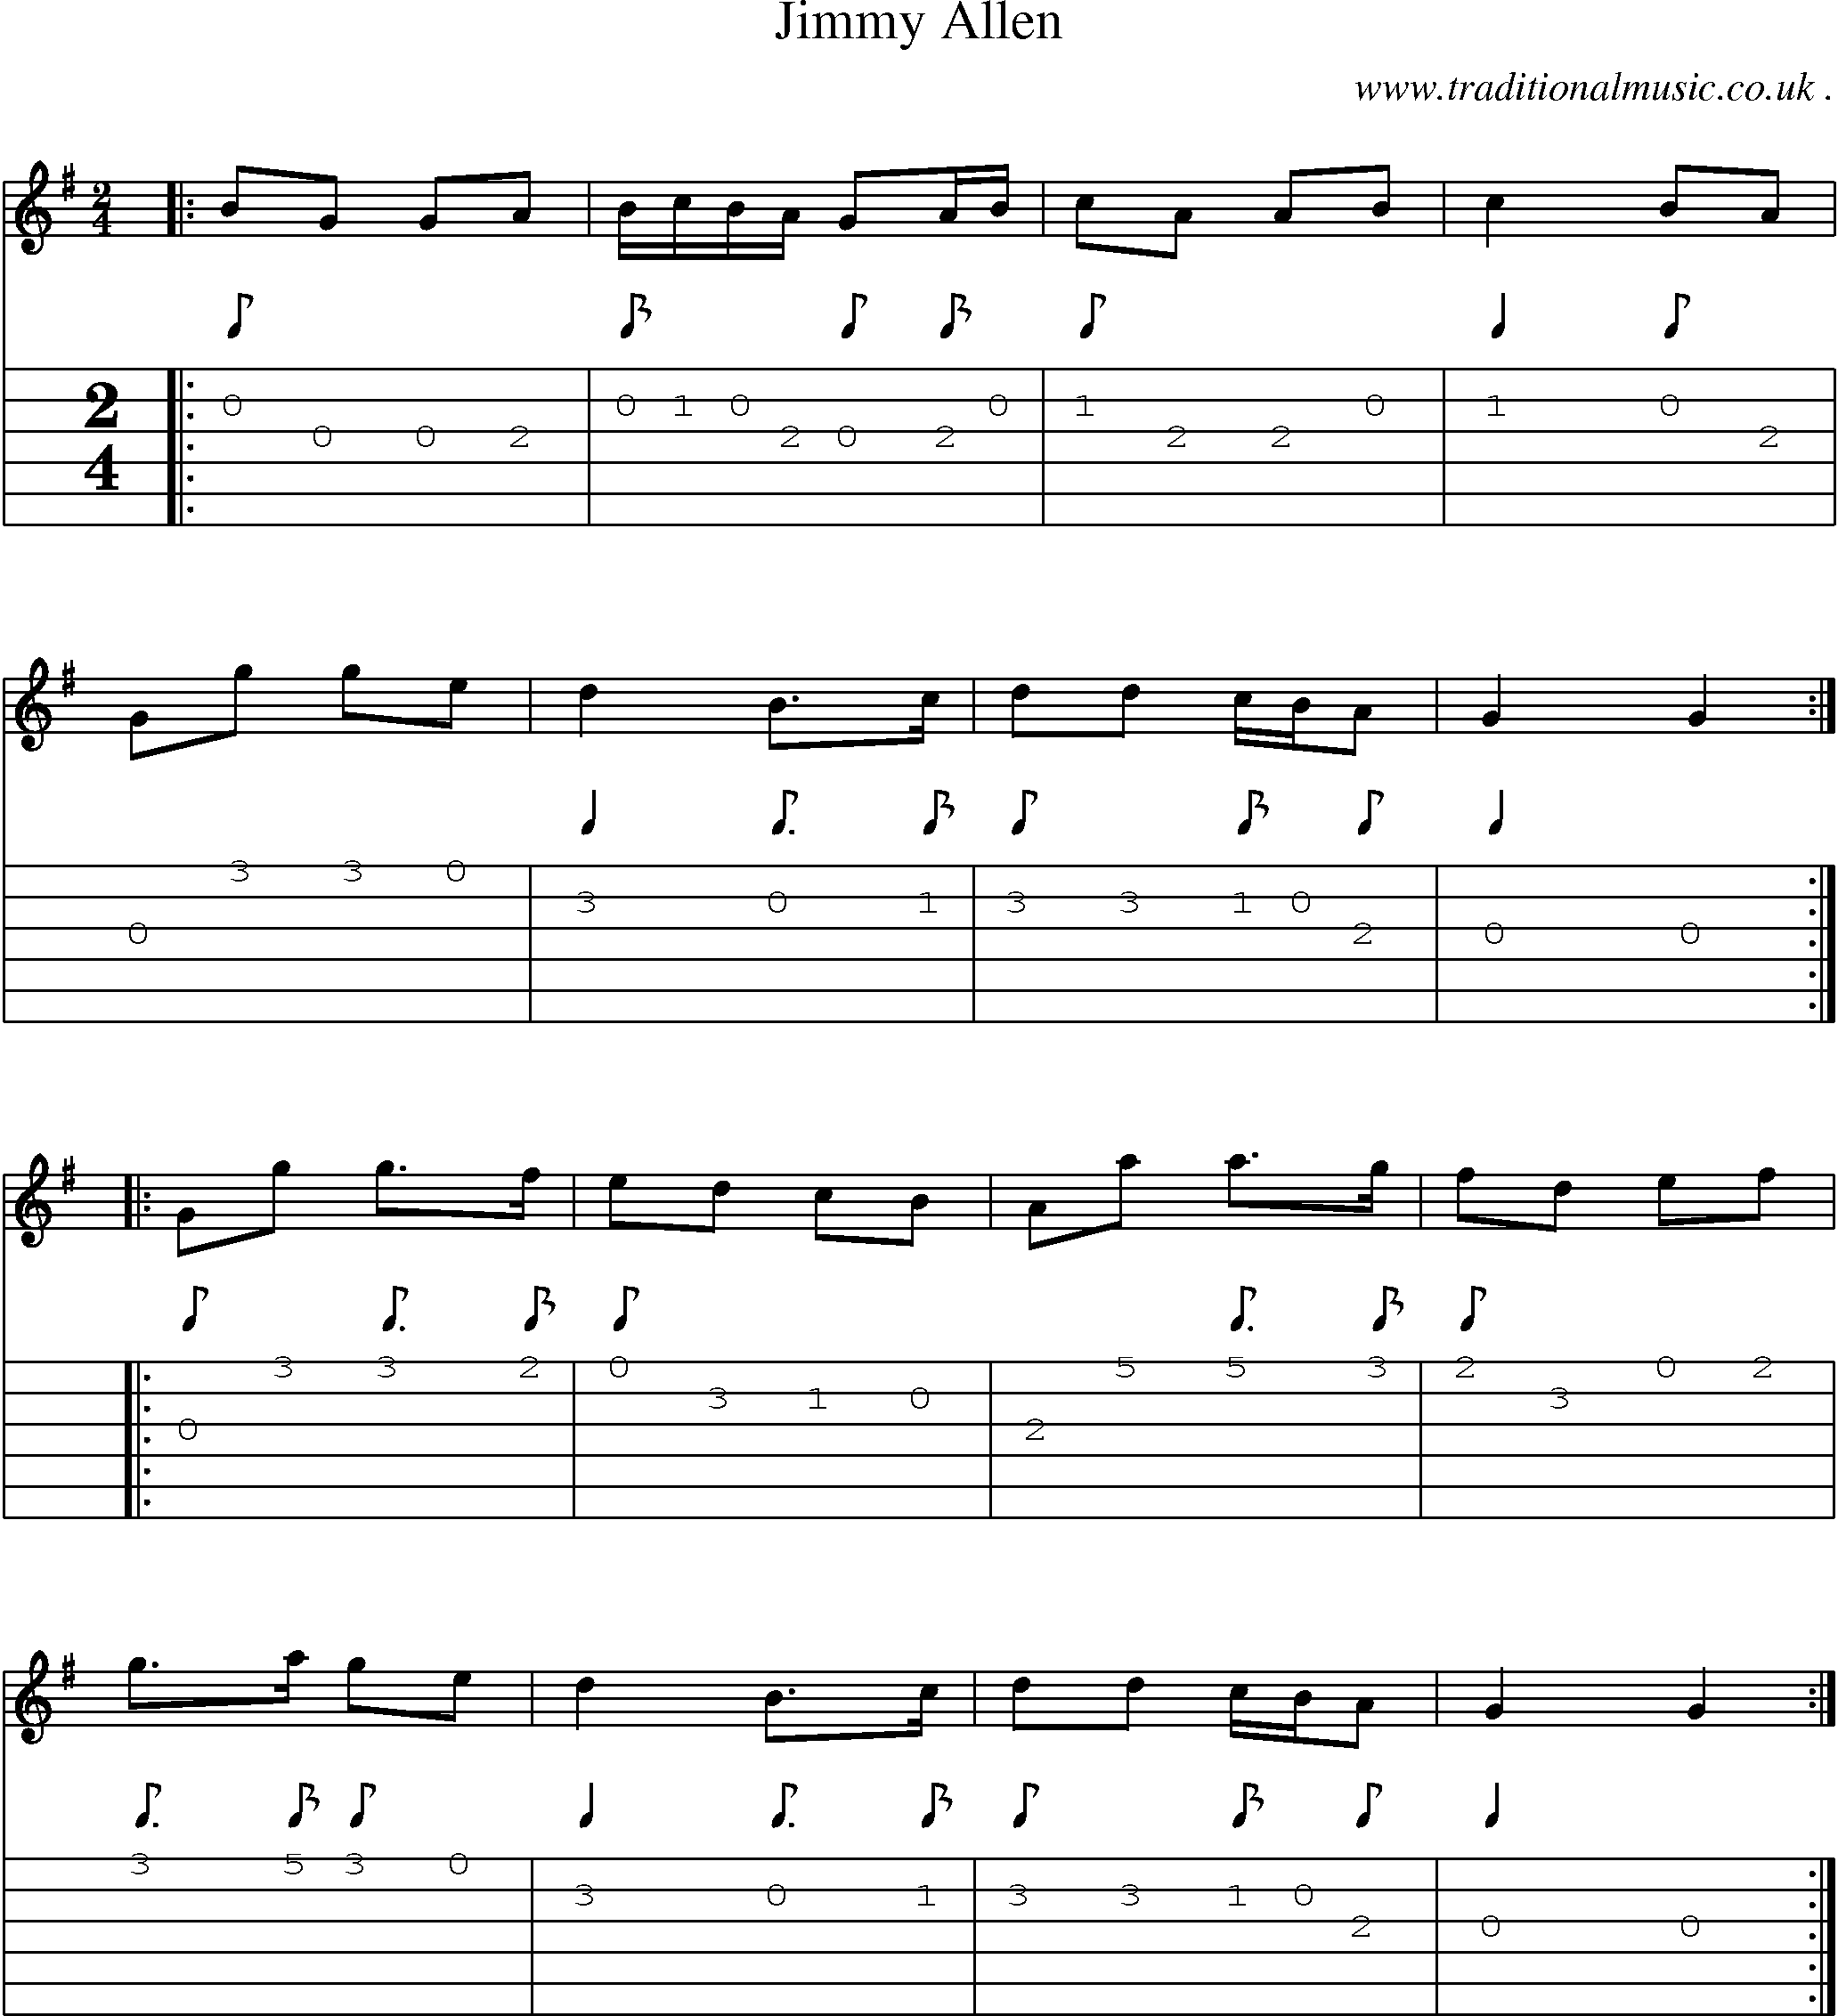 Sheet-Music and Guitar Tabs for Jimmy Allen